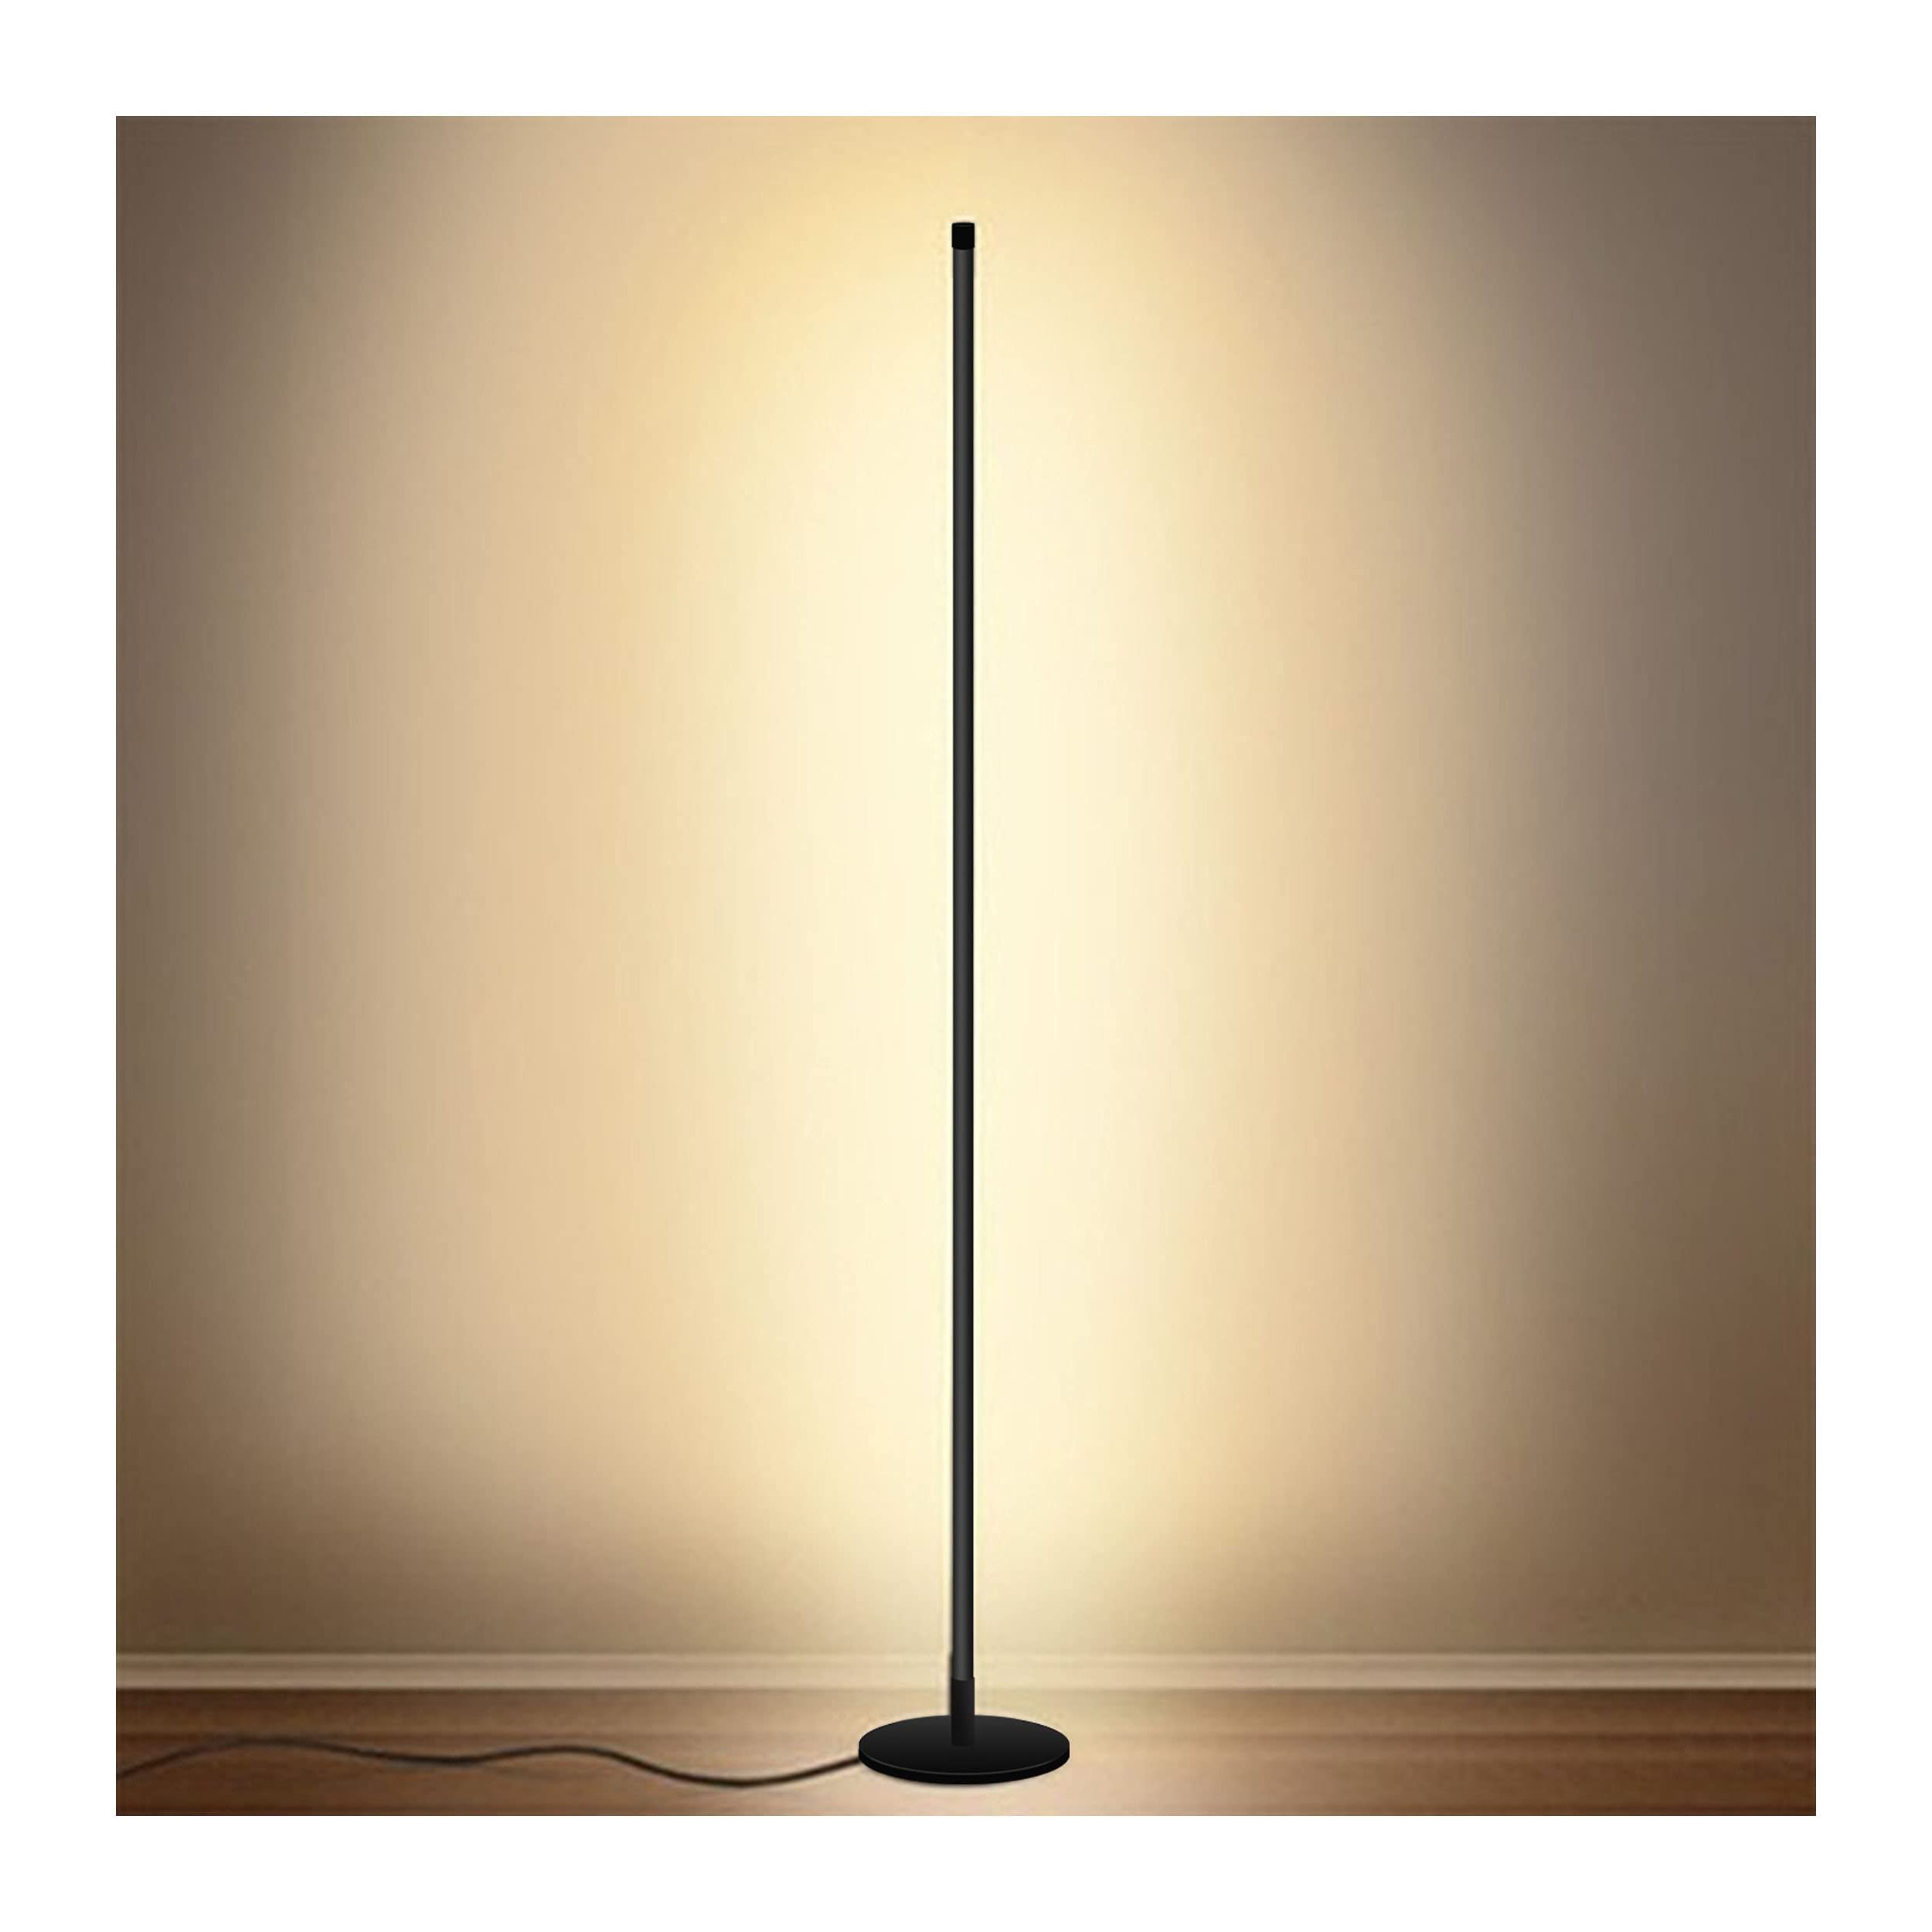 Modern Standing Lamps Inside Famous Modern Floor Lamp Led Standing Corner Lamp Black Decor Floor Lamps  Contemporary Metal Floor Lamp For Living Room Bedrooms With Remote & Touch  Control – – Amazon (View 1 of 15)